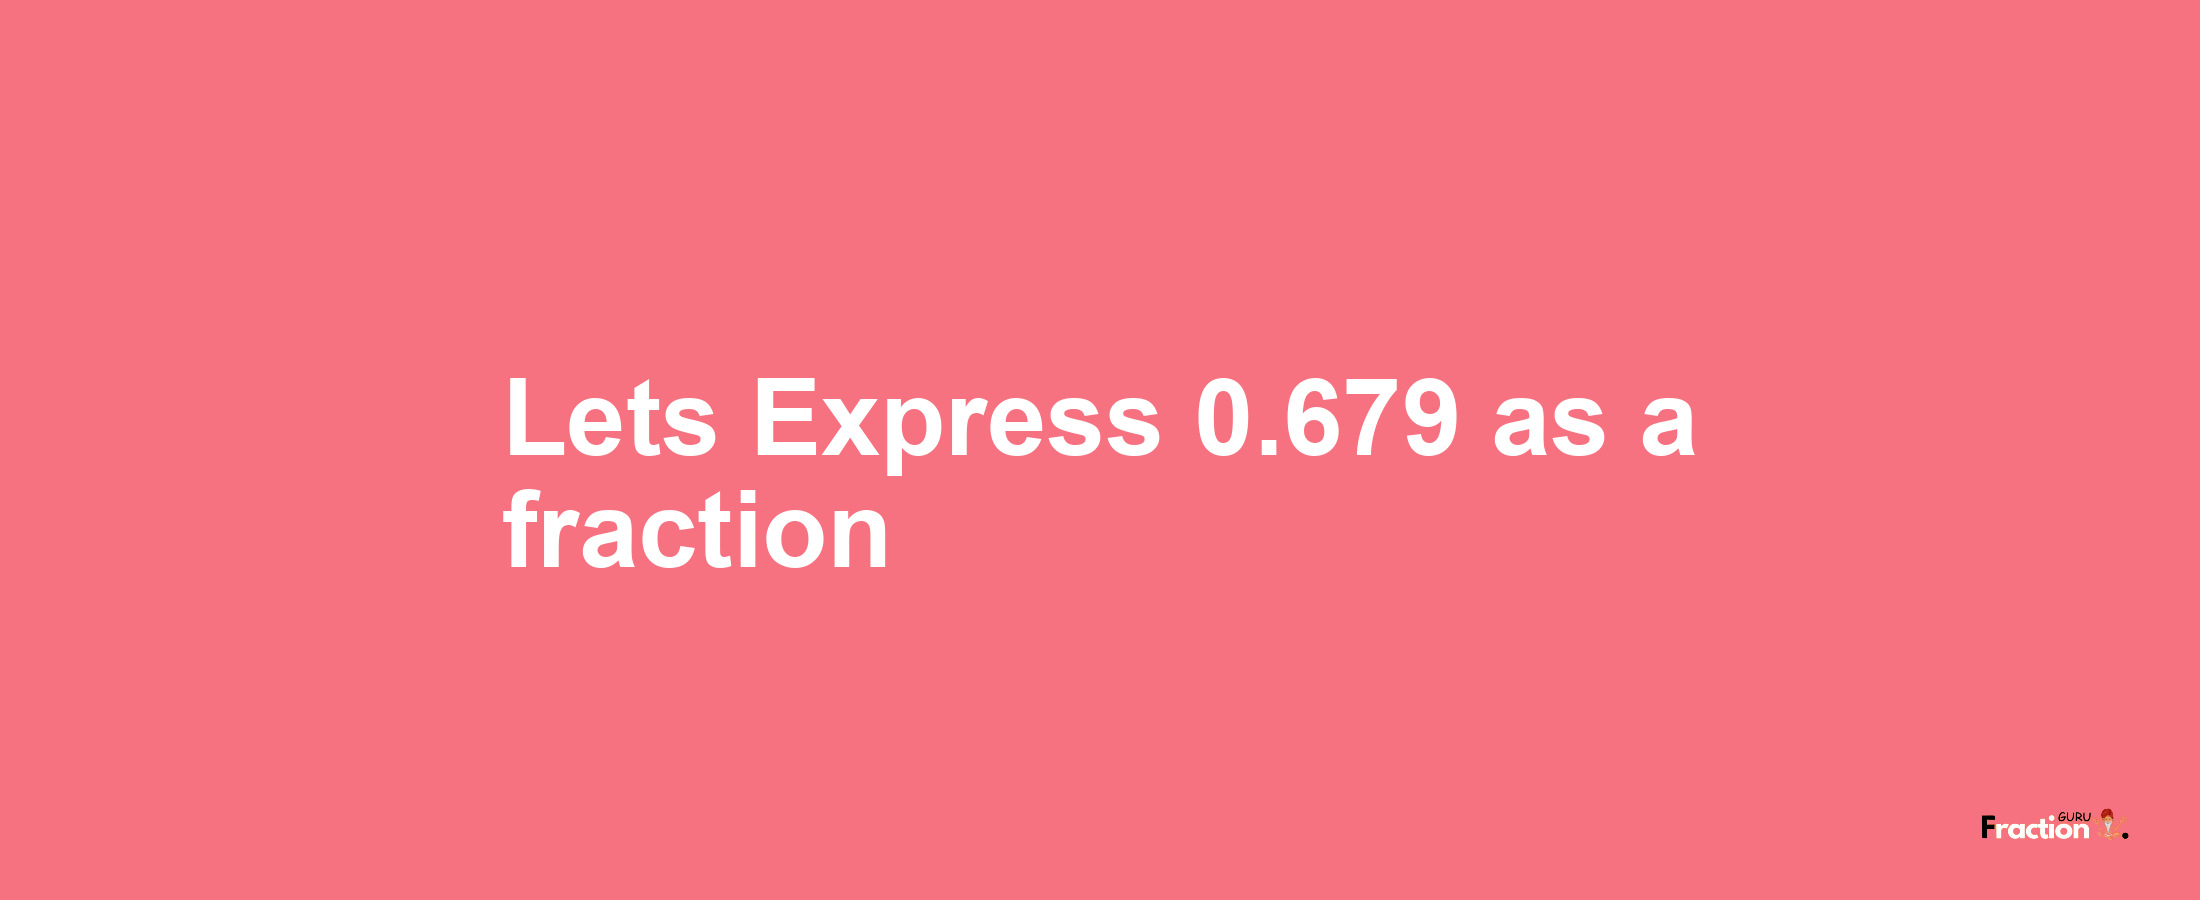 Lets Express 0.679 as afraction